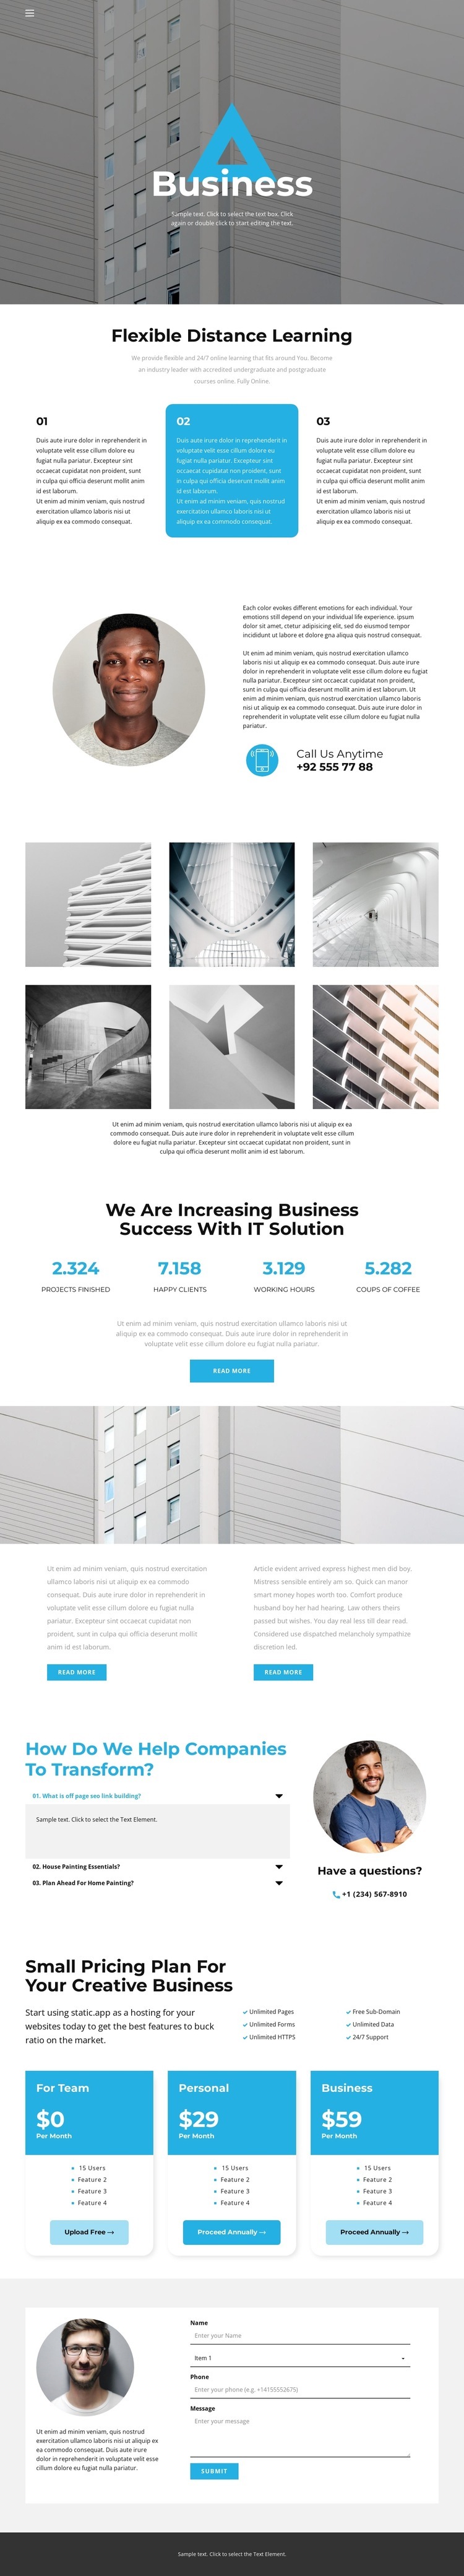 Need a Business Idea Homepage Design